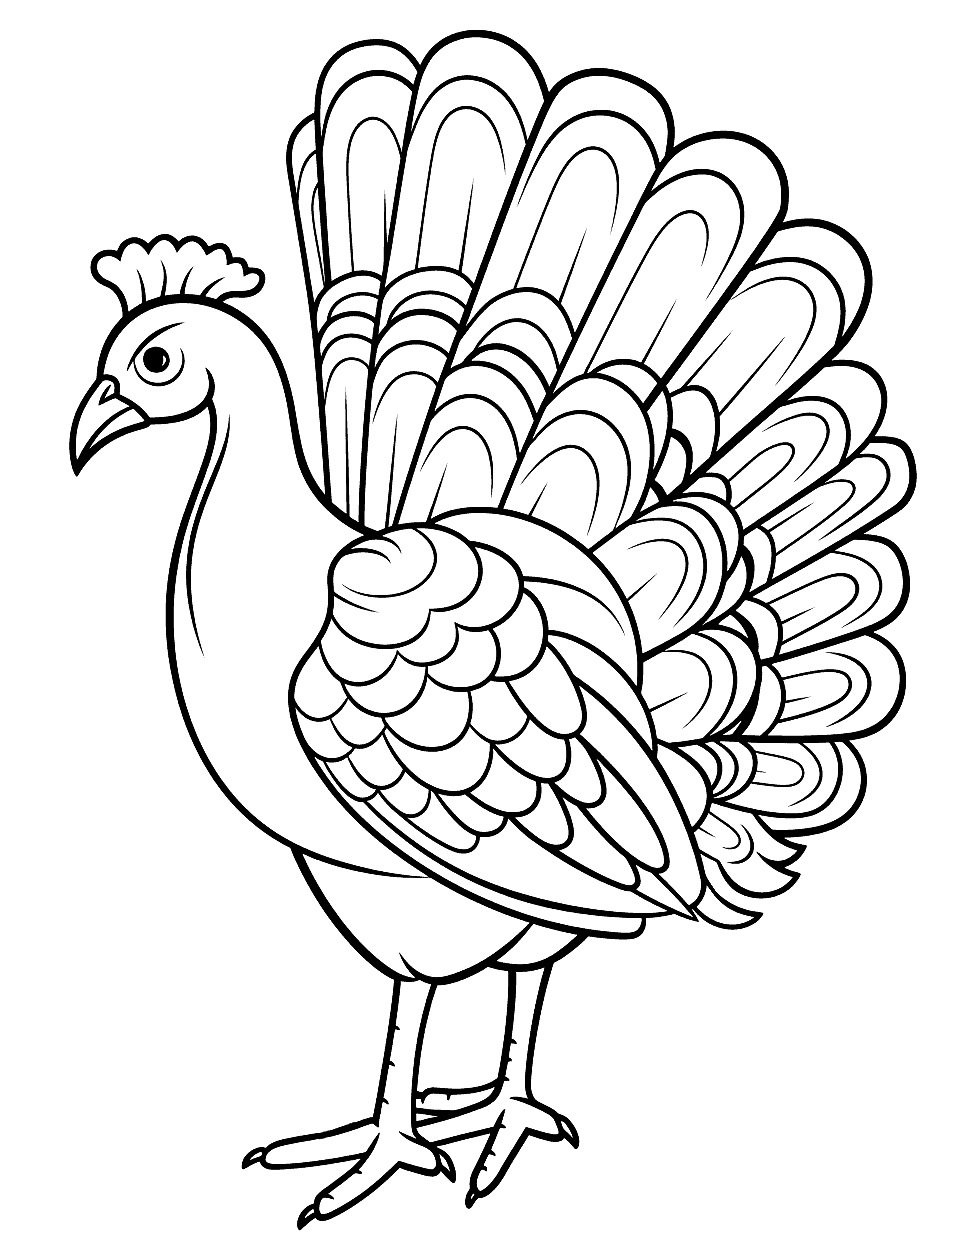 Angry Turkey Coloring Page - An intermediate turkey outline with an angry expression on its face.